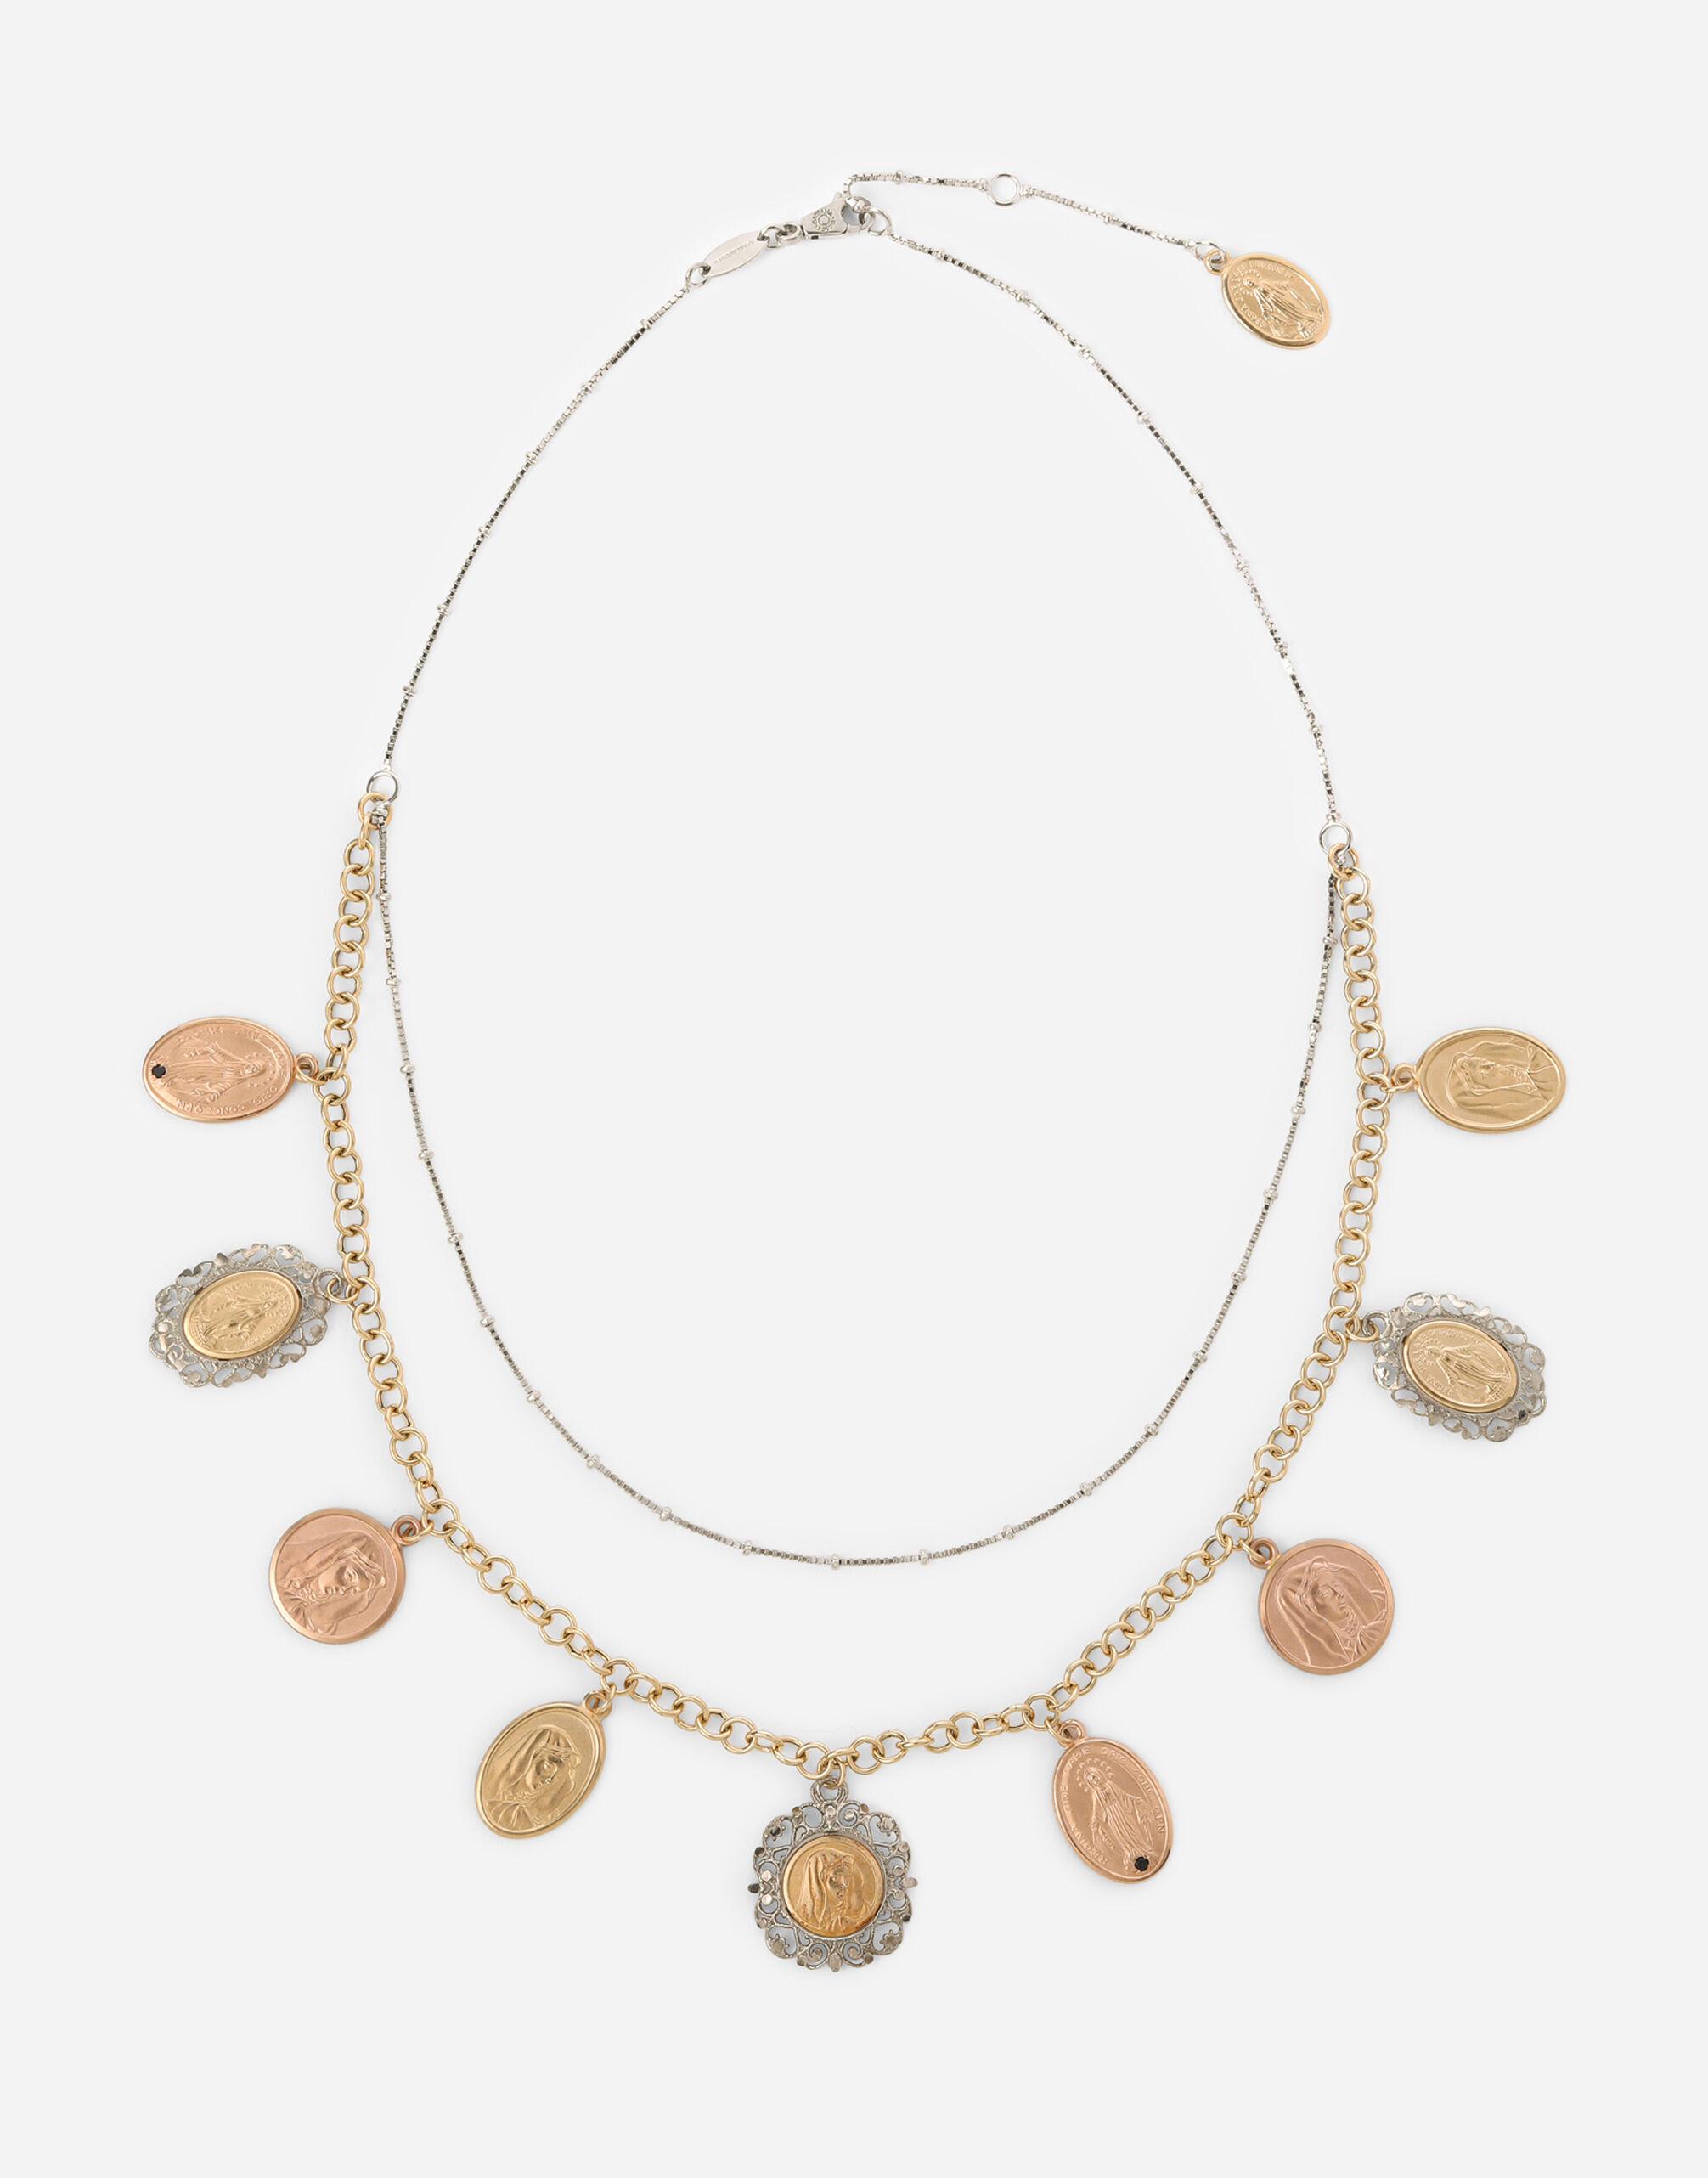 Dolce & Gabbana Sicily necklace in yellow, red and white 18kt gold with medals Gold WALK5GWYE01